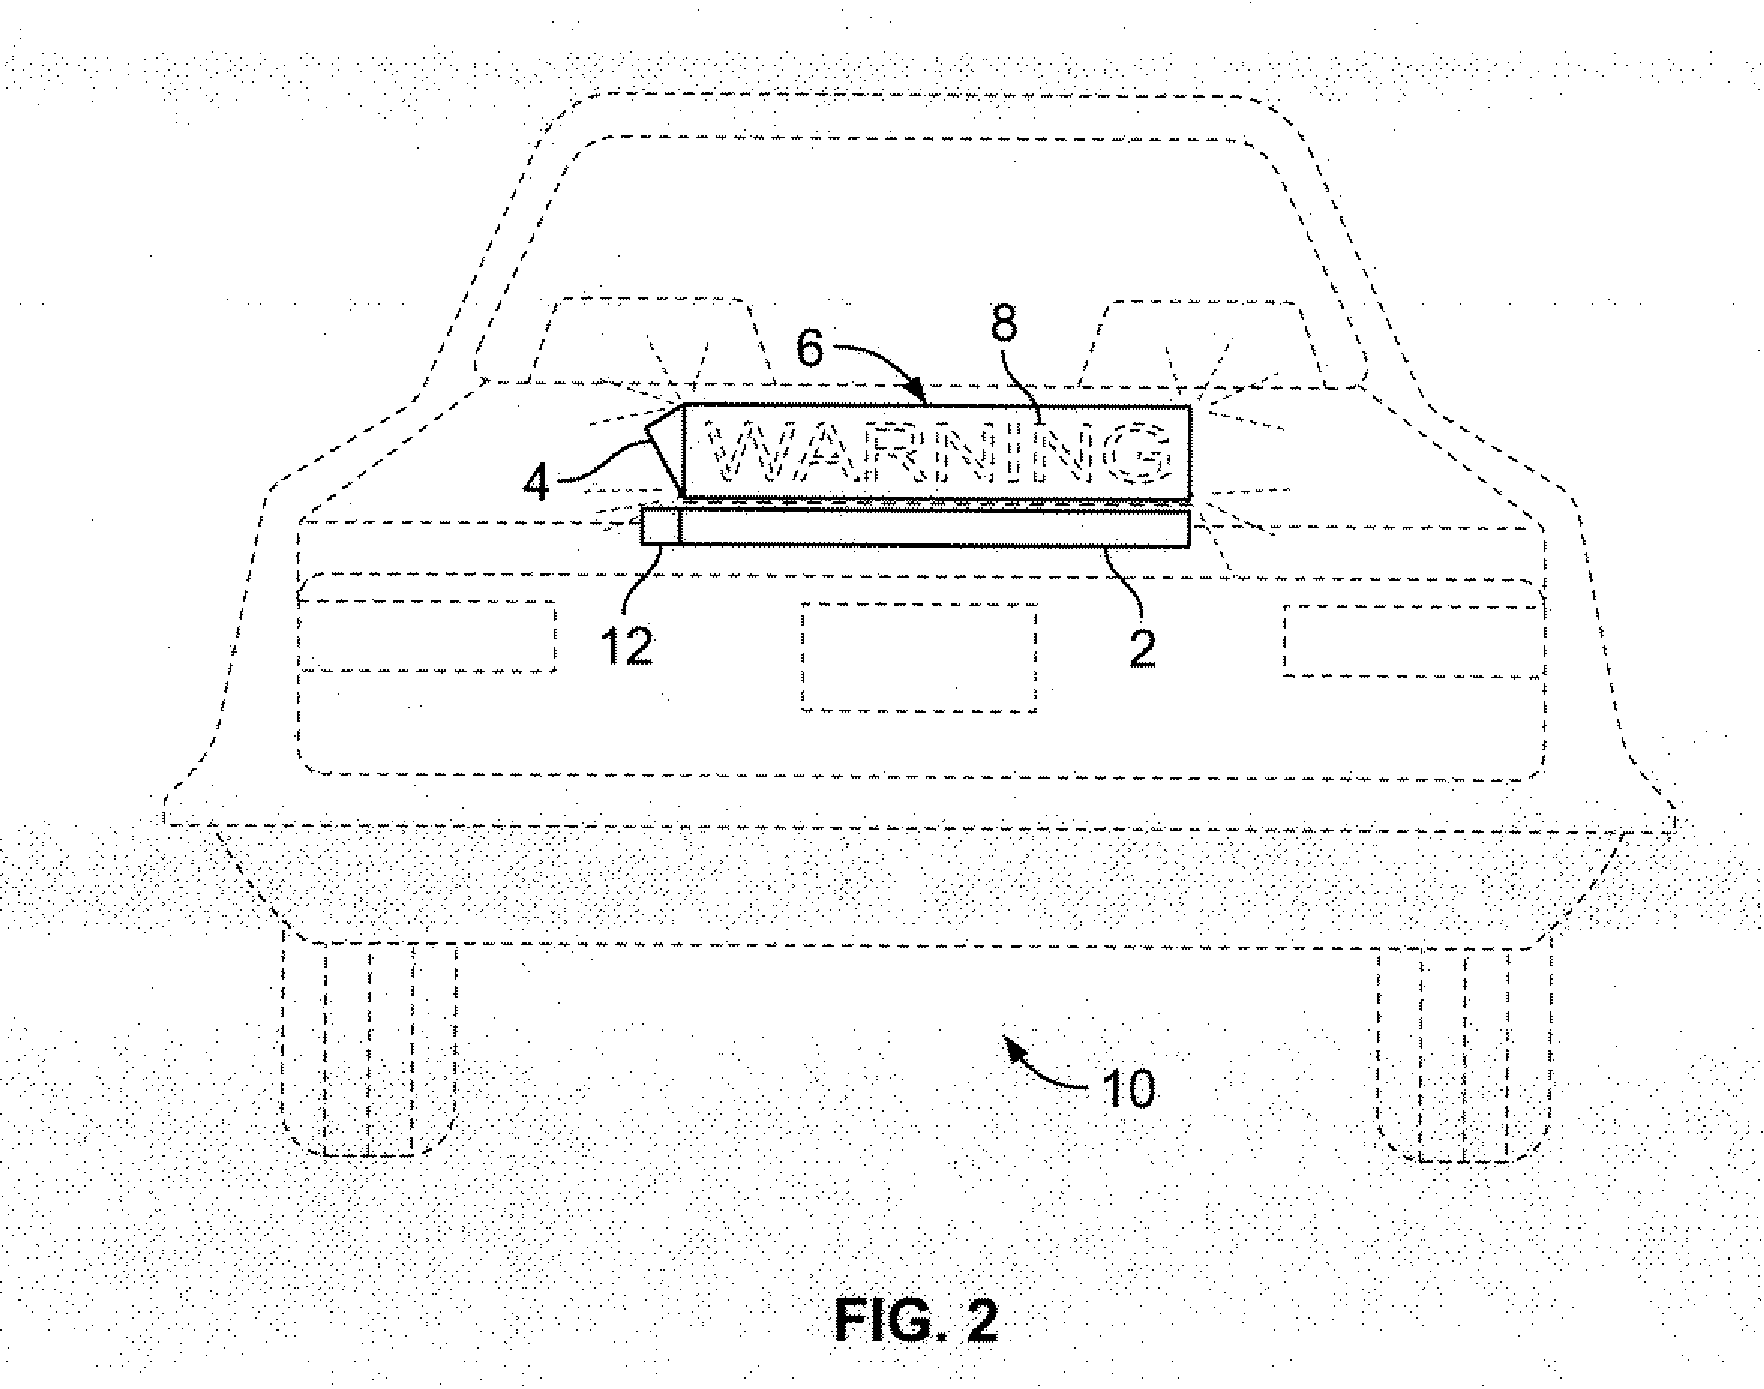 Method and apparatus for an automobile that alerts others to unsafe driving conditions or an automobile accident